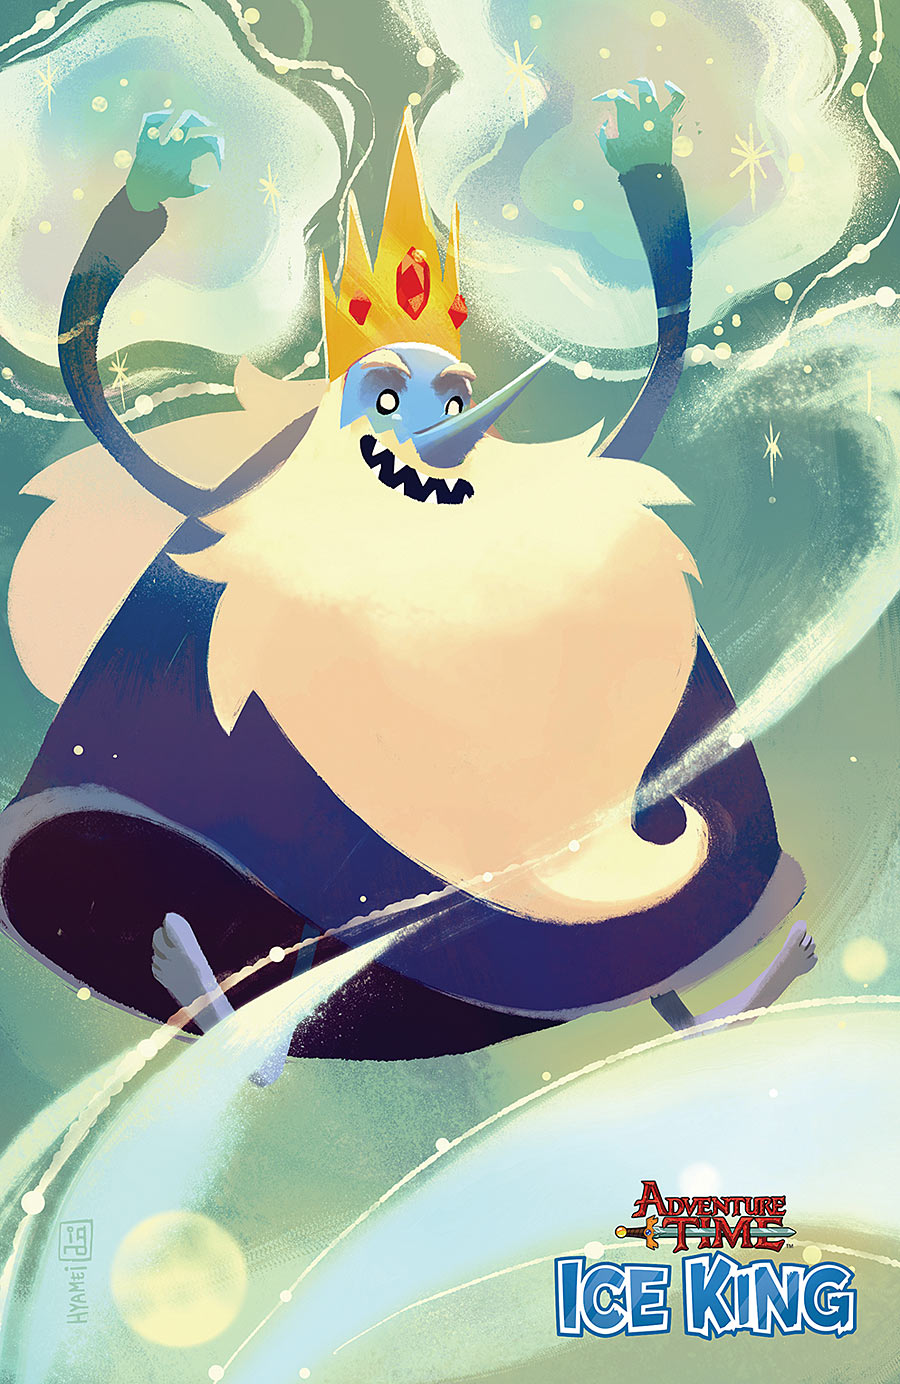 Adventure Time Ice King Issue 5 Adventure Time Wiki Fandom Powered